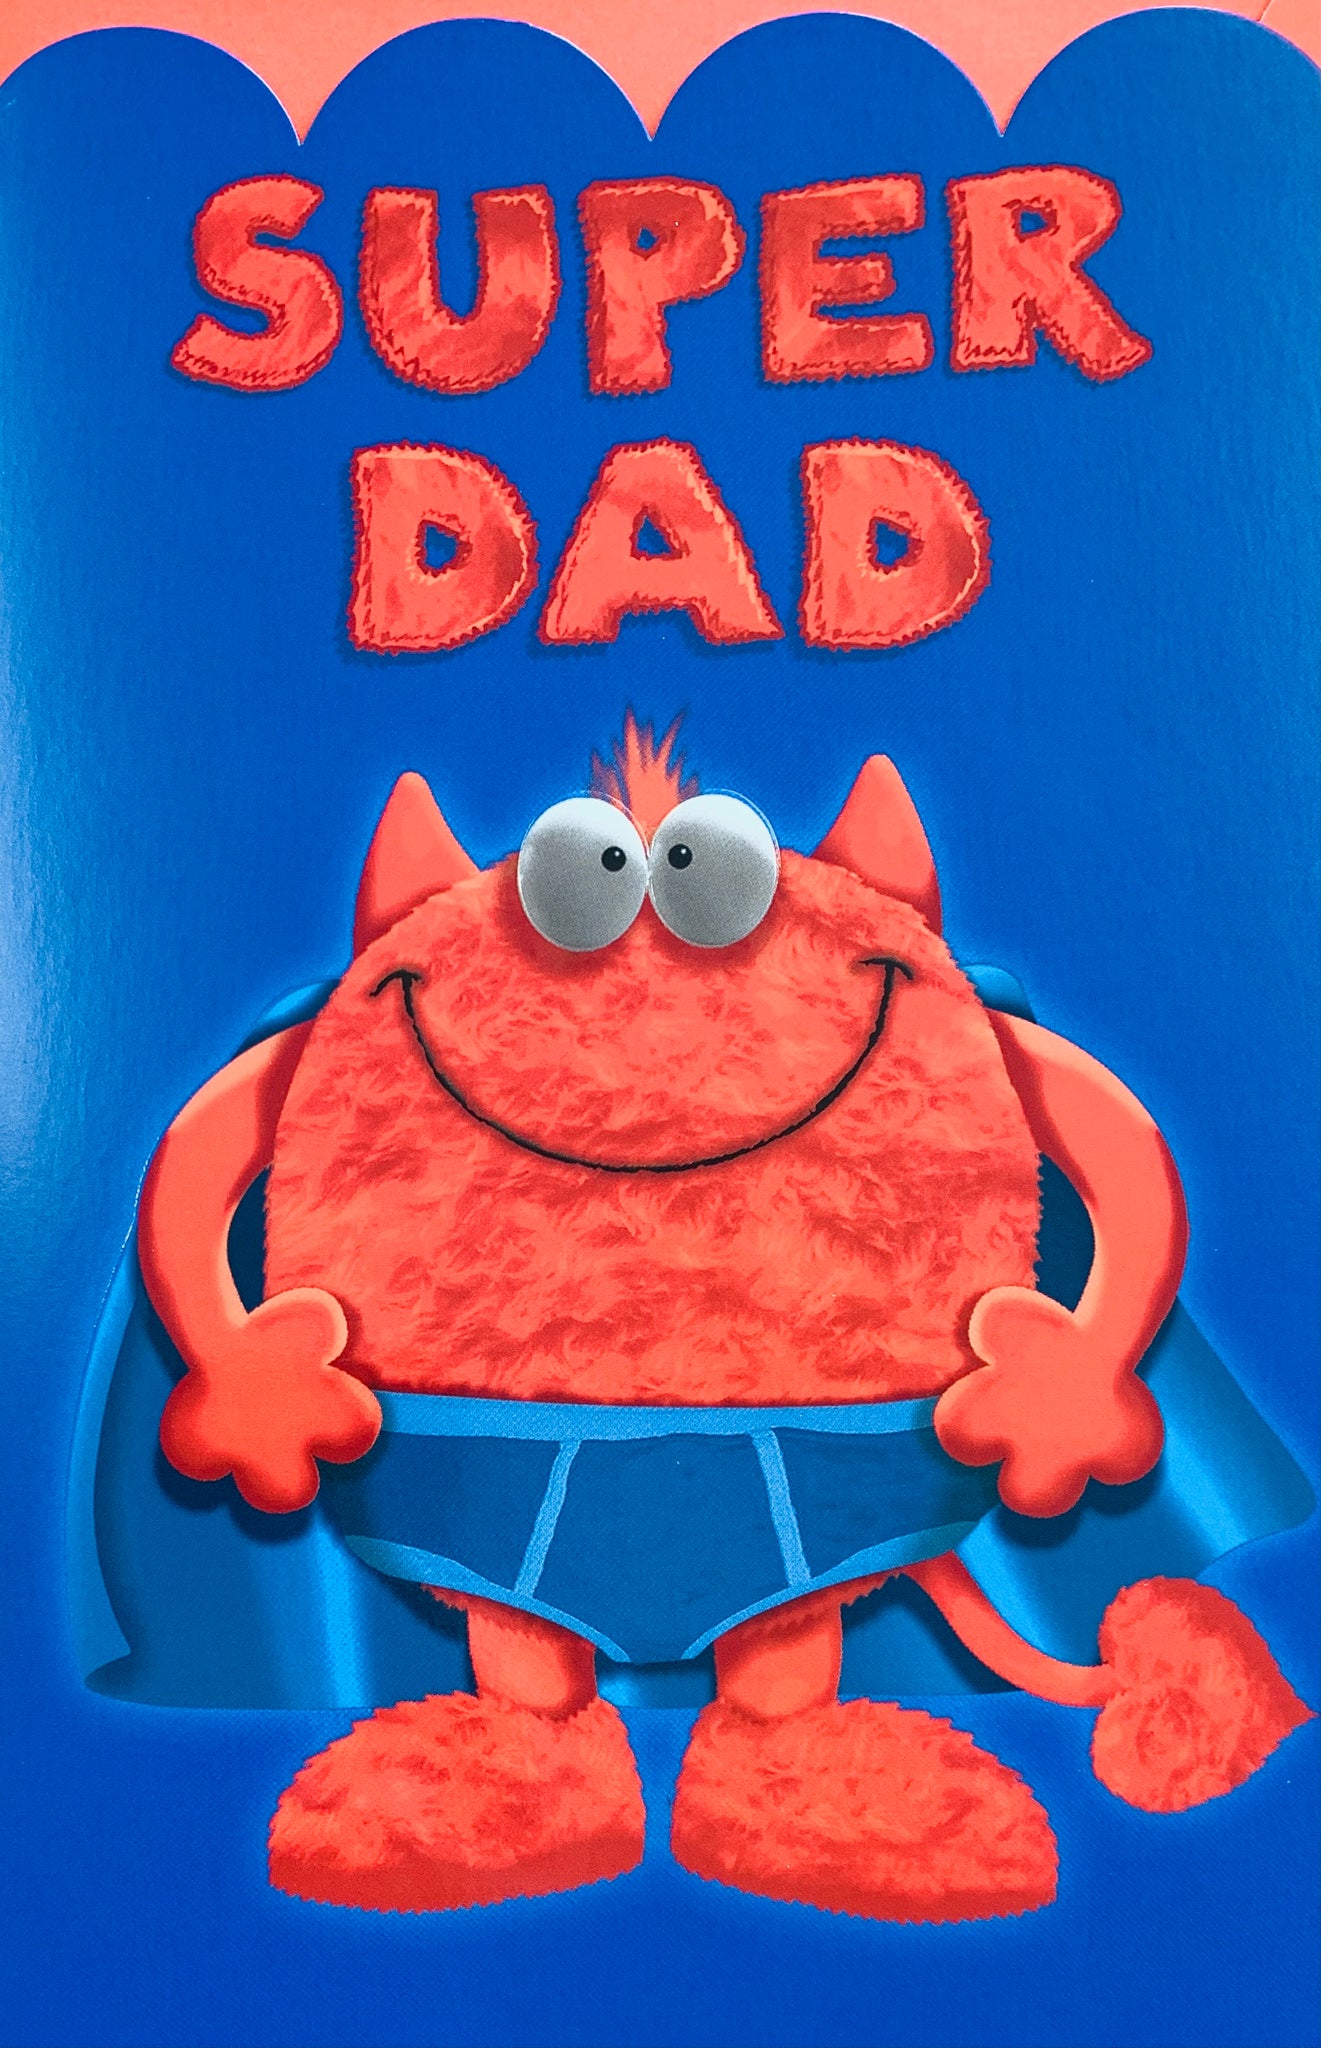 Dad Father’s Day card - cute monster